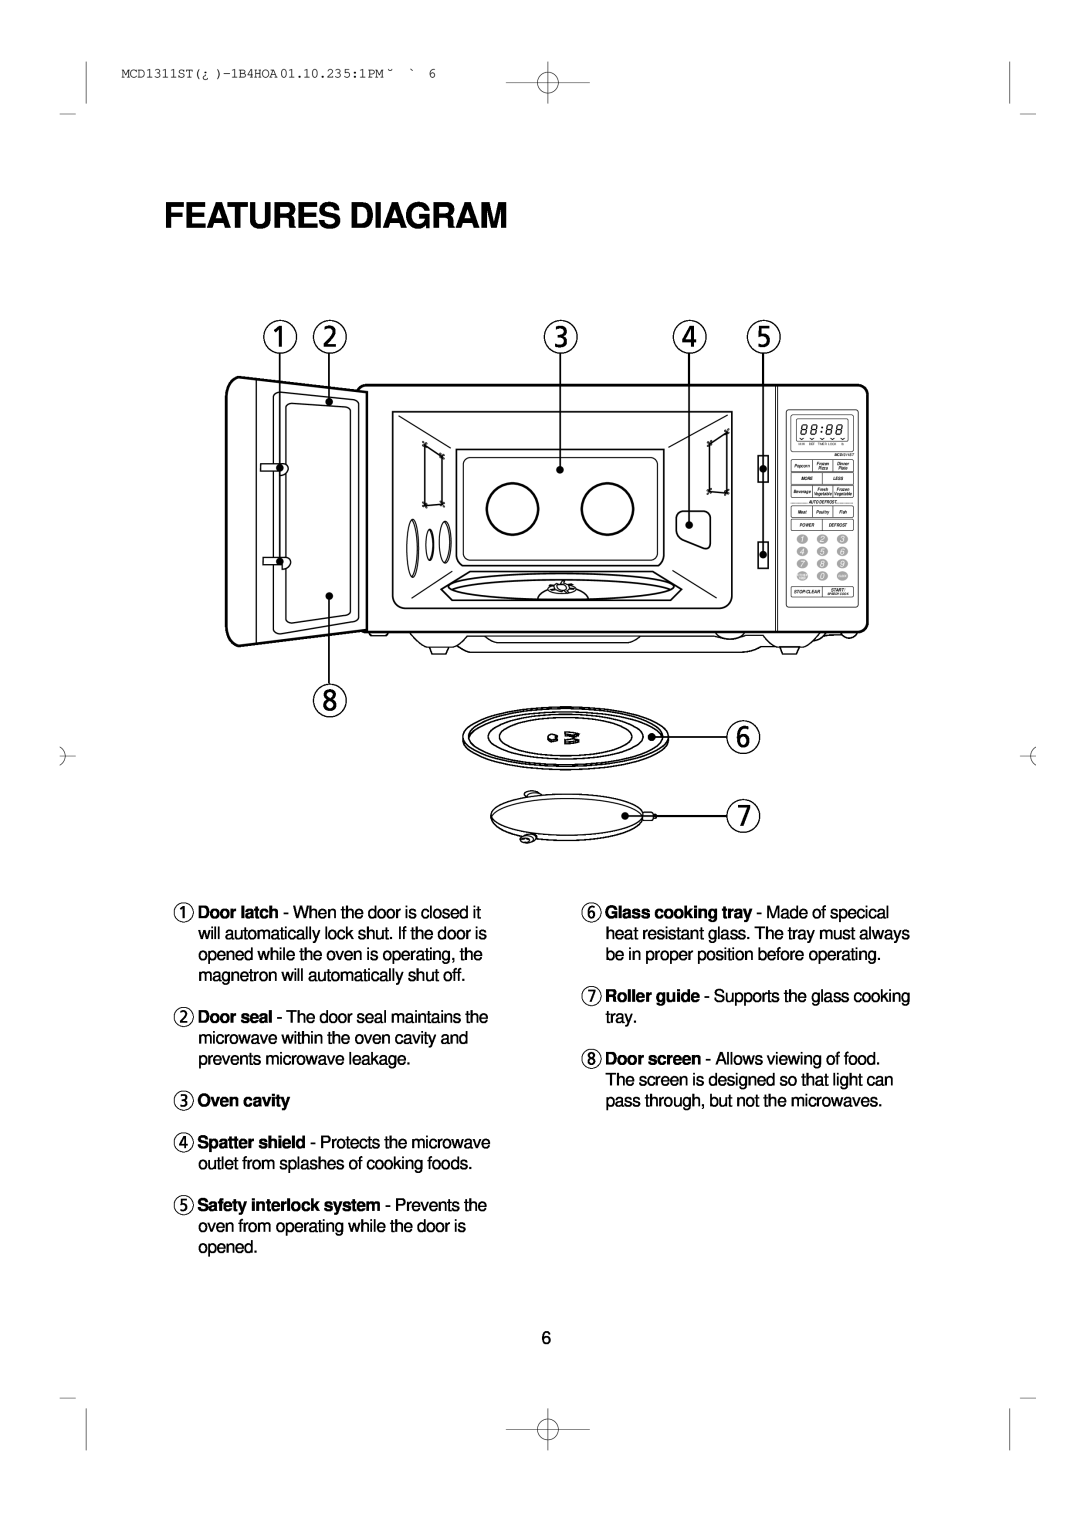 Magic Chef MCD1311ST manual Features Diagram, Oven cavity 